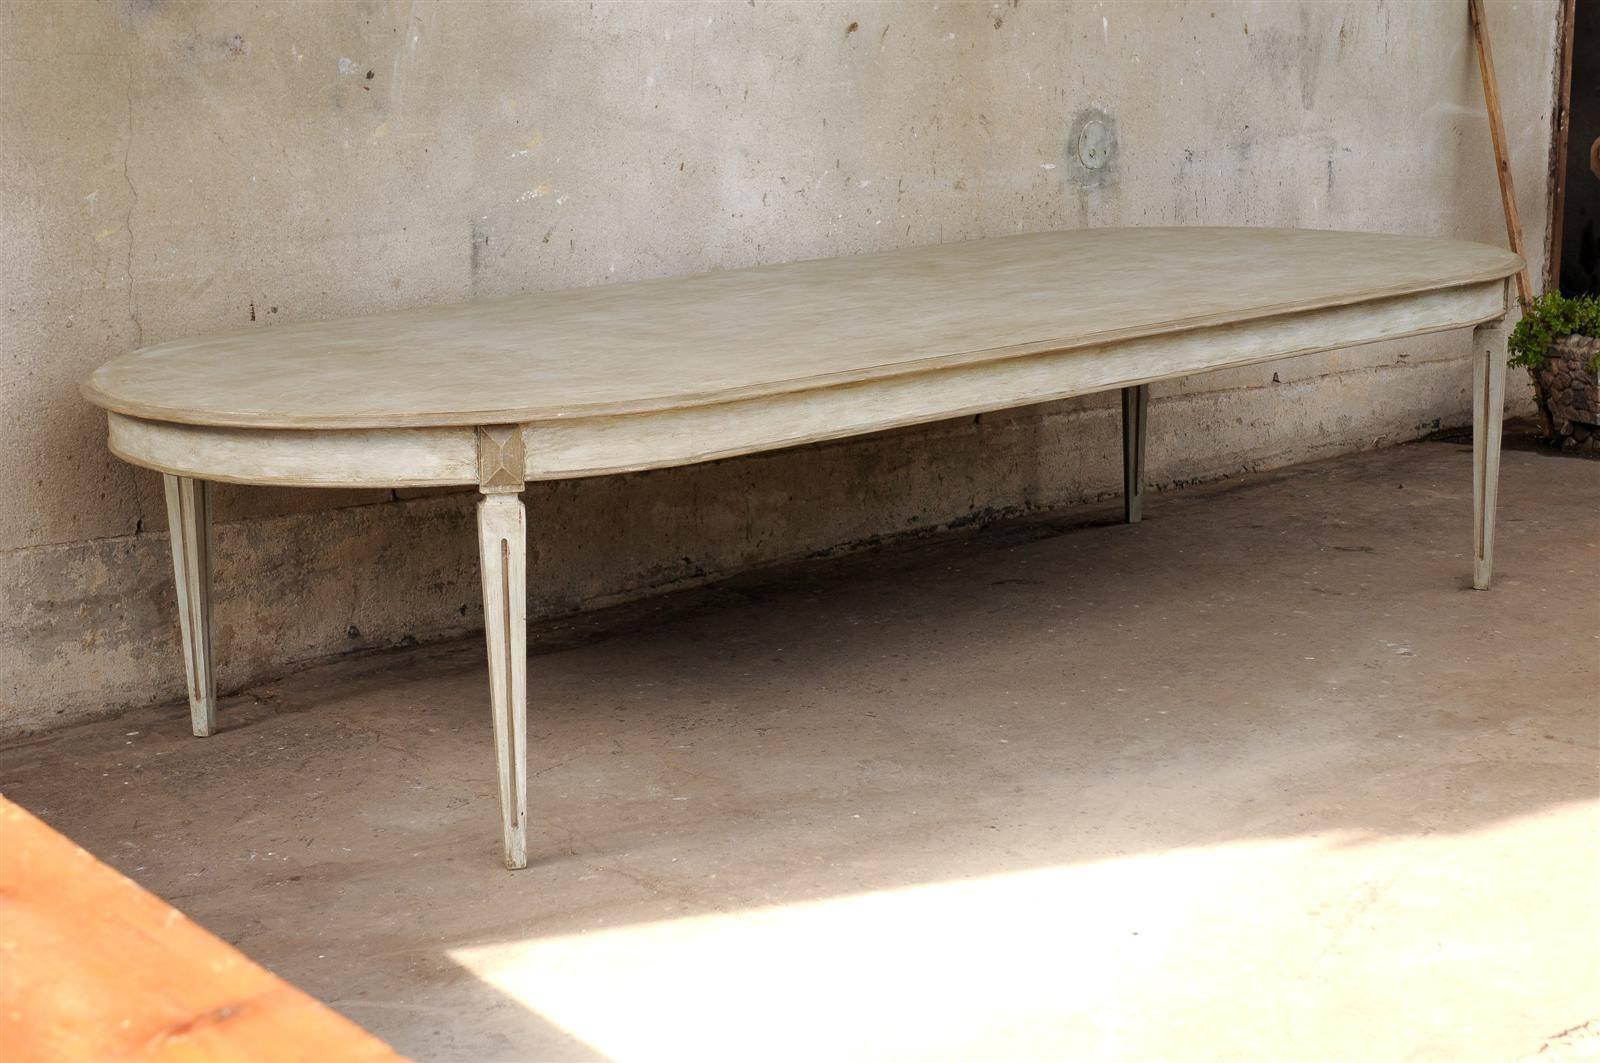 A Swedish Gustavian Style oval painted wood dining table made of two Swedish, 19th century demilunes to which a custom permanent leaf was incorporated. Nice tapered legs.